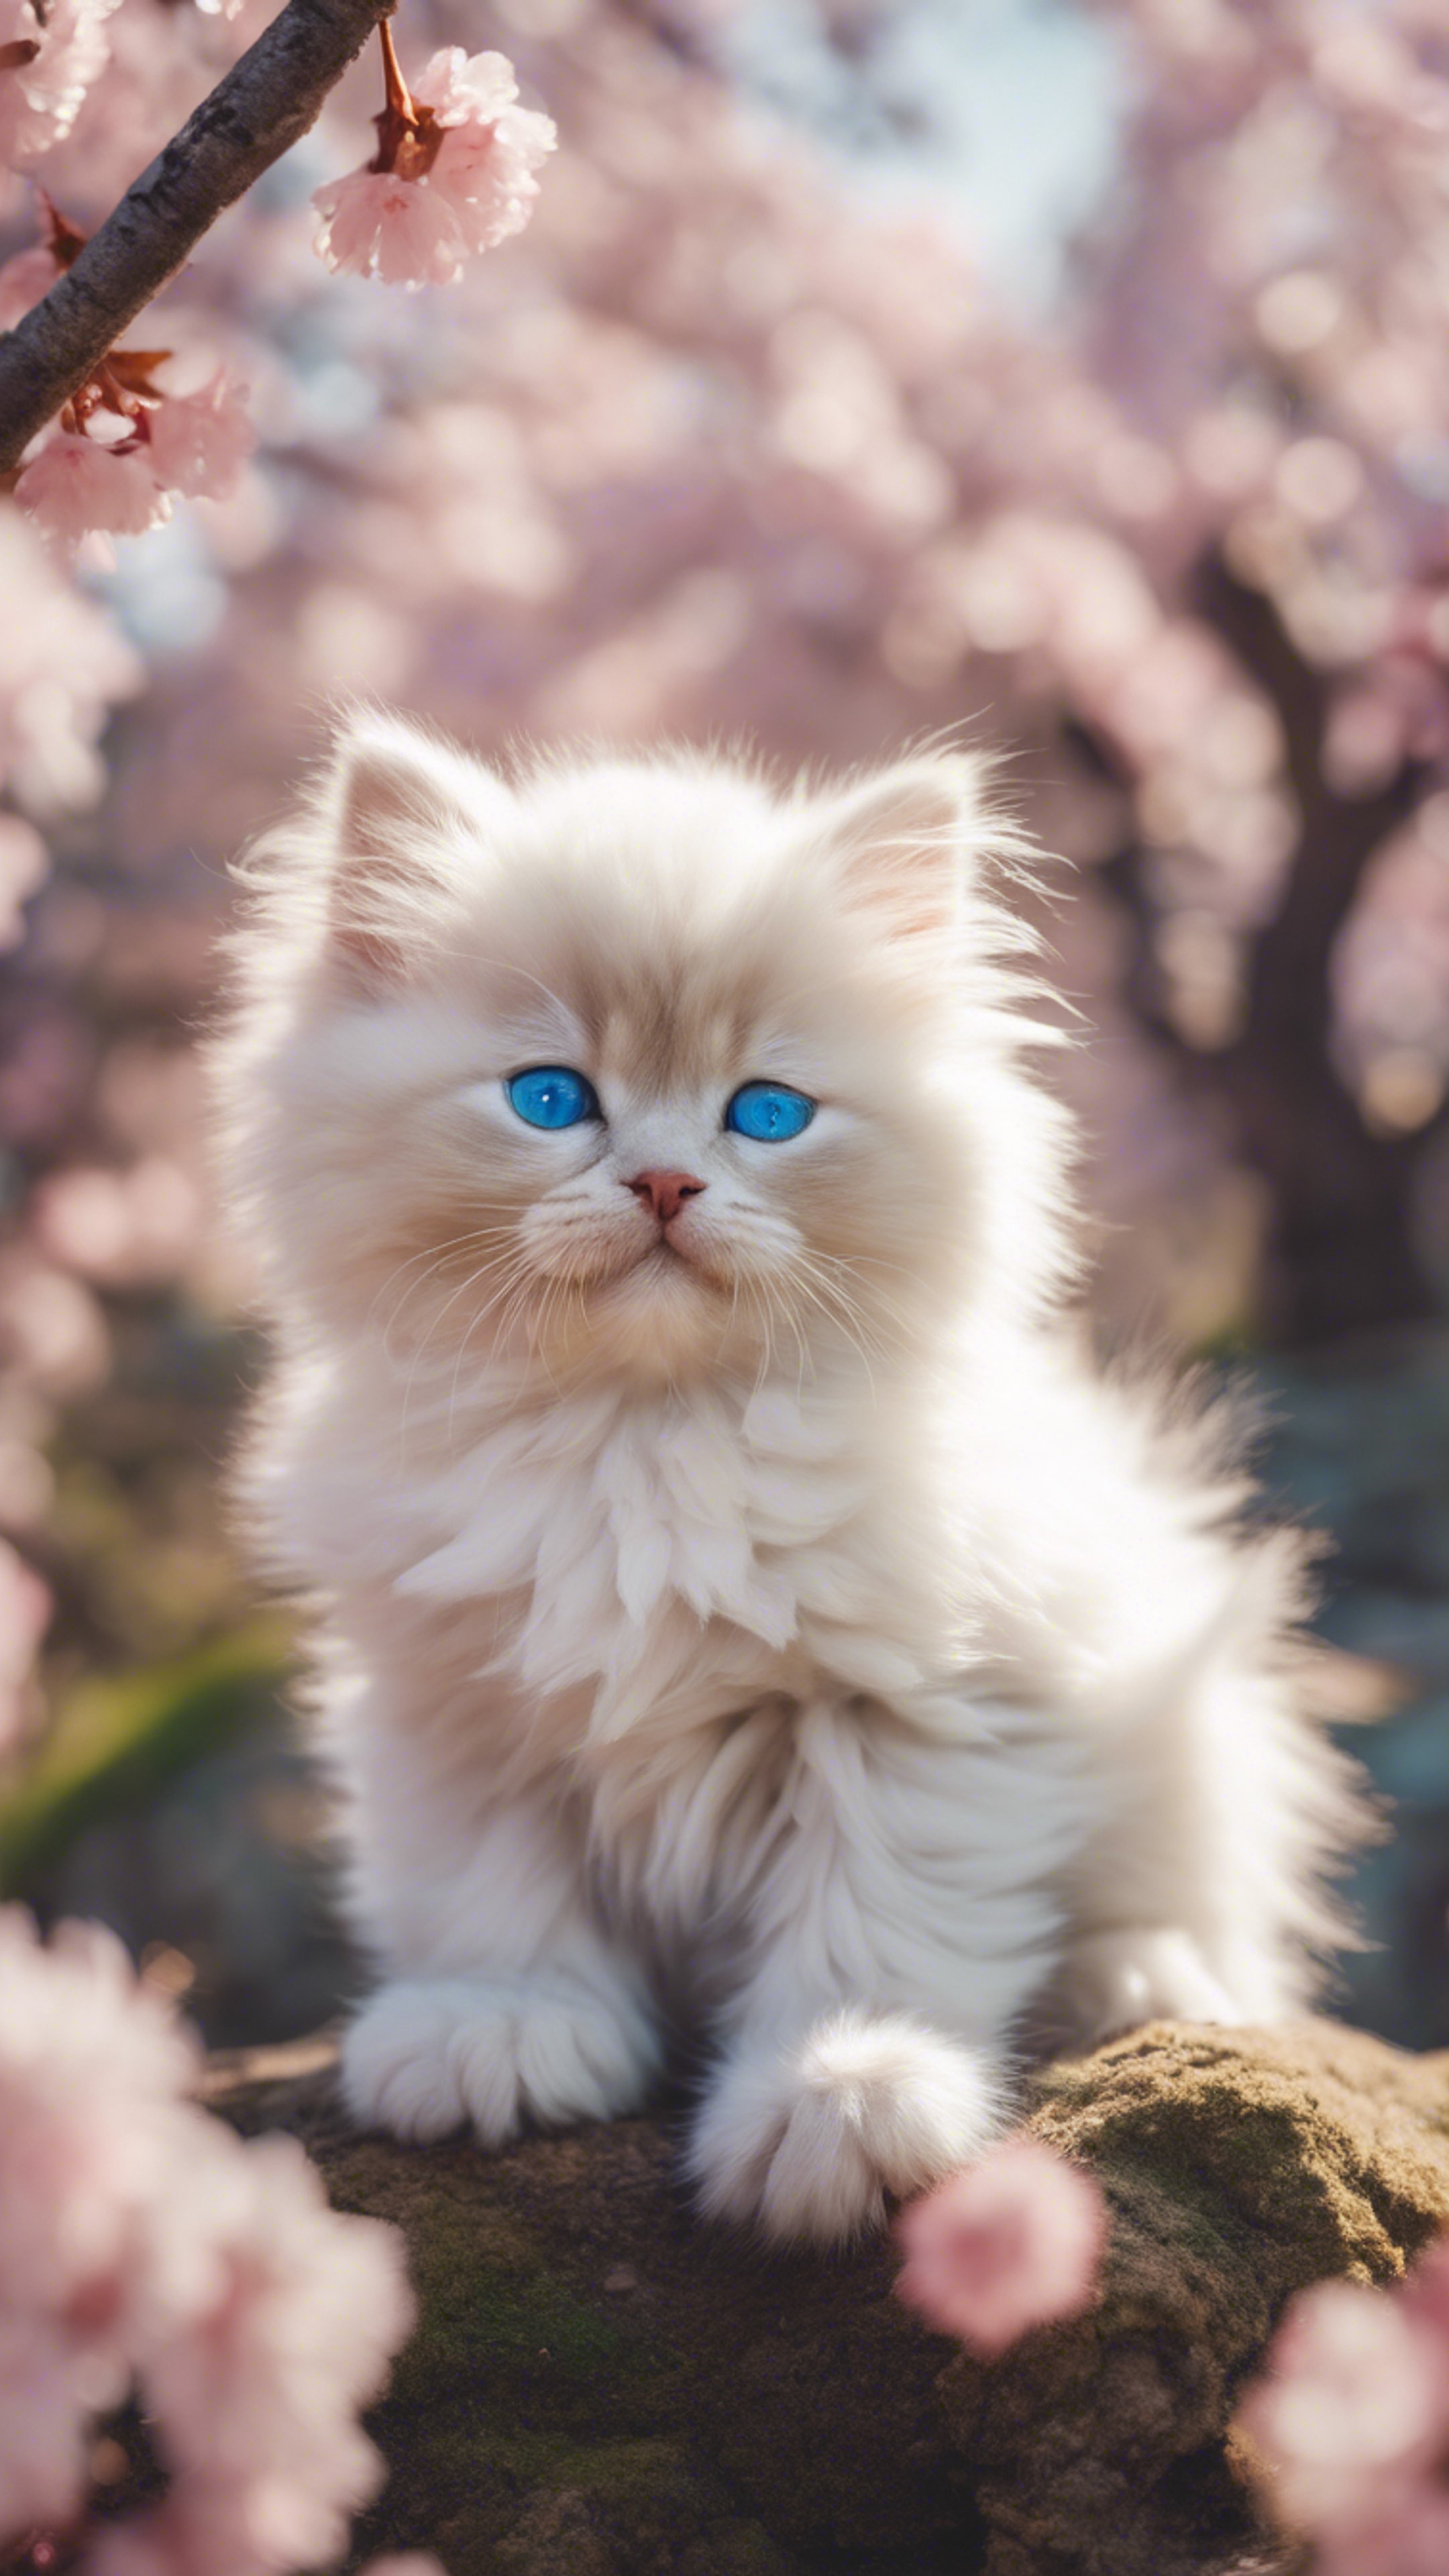 A fluffy Himalayan kitten with blue eyes, blissfully sleeping in a cherry blossom-filled Japanese garden in springtime. 墙纸[7574b48ca53a4fd7b91a]